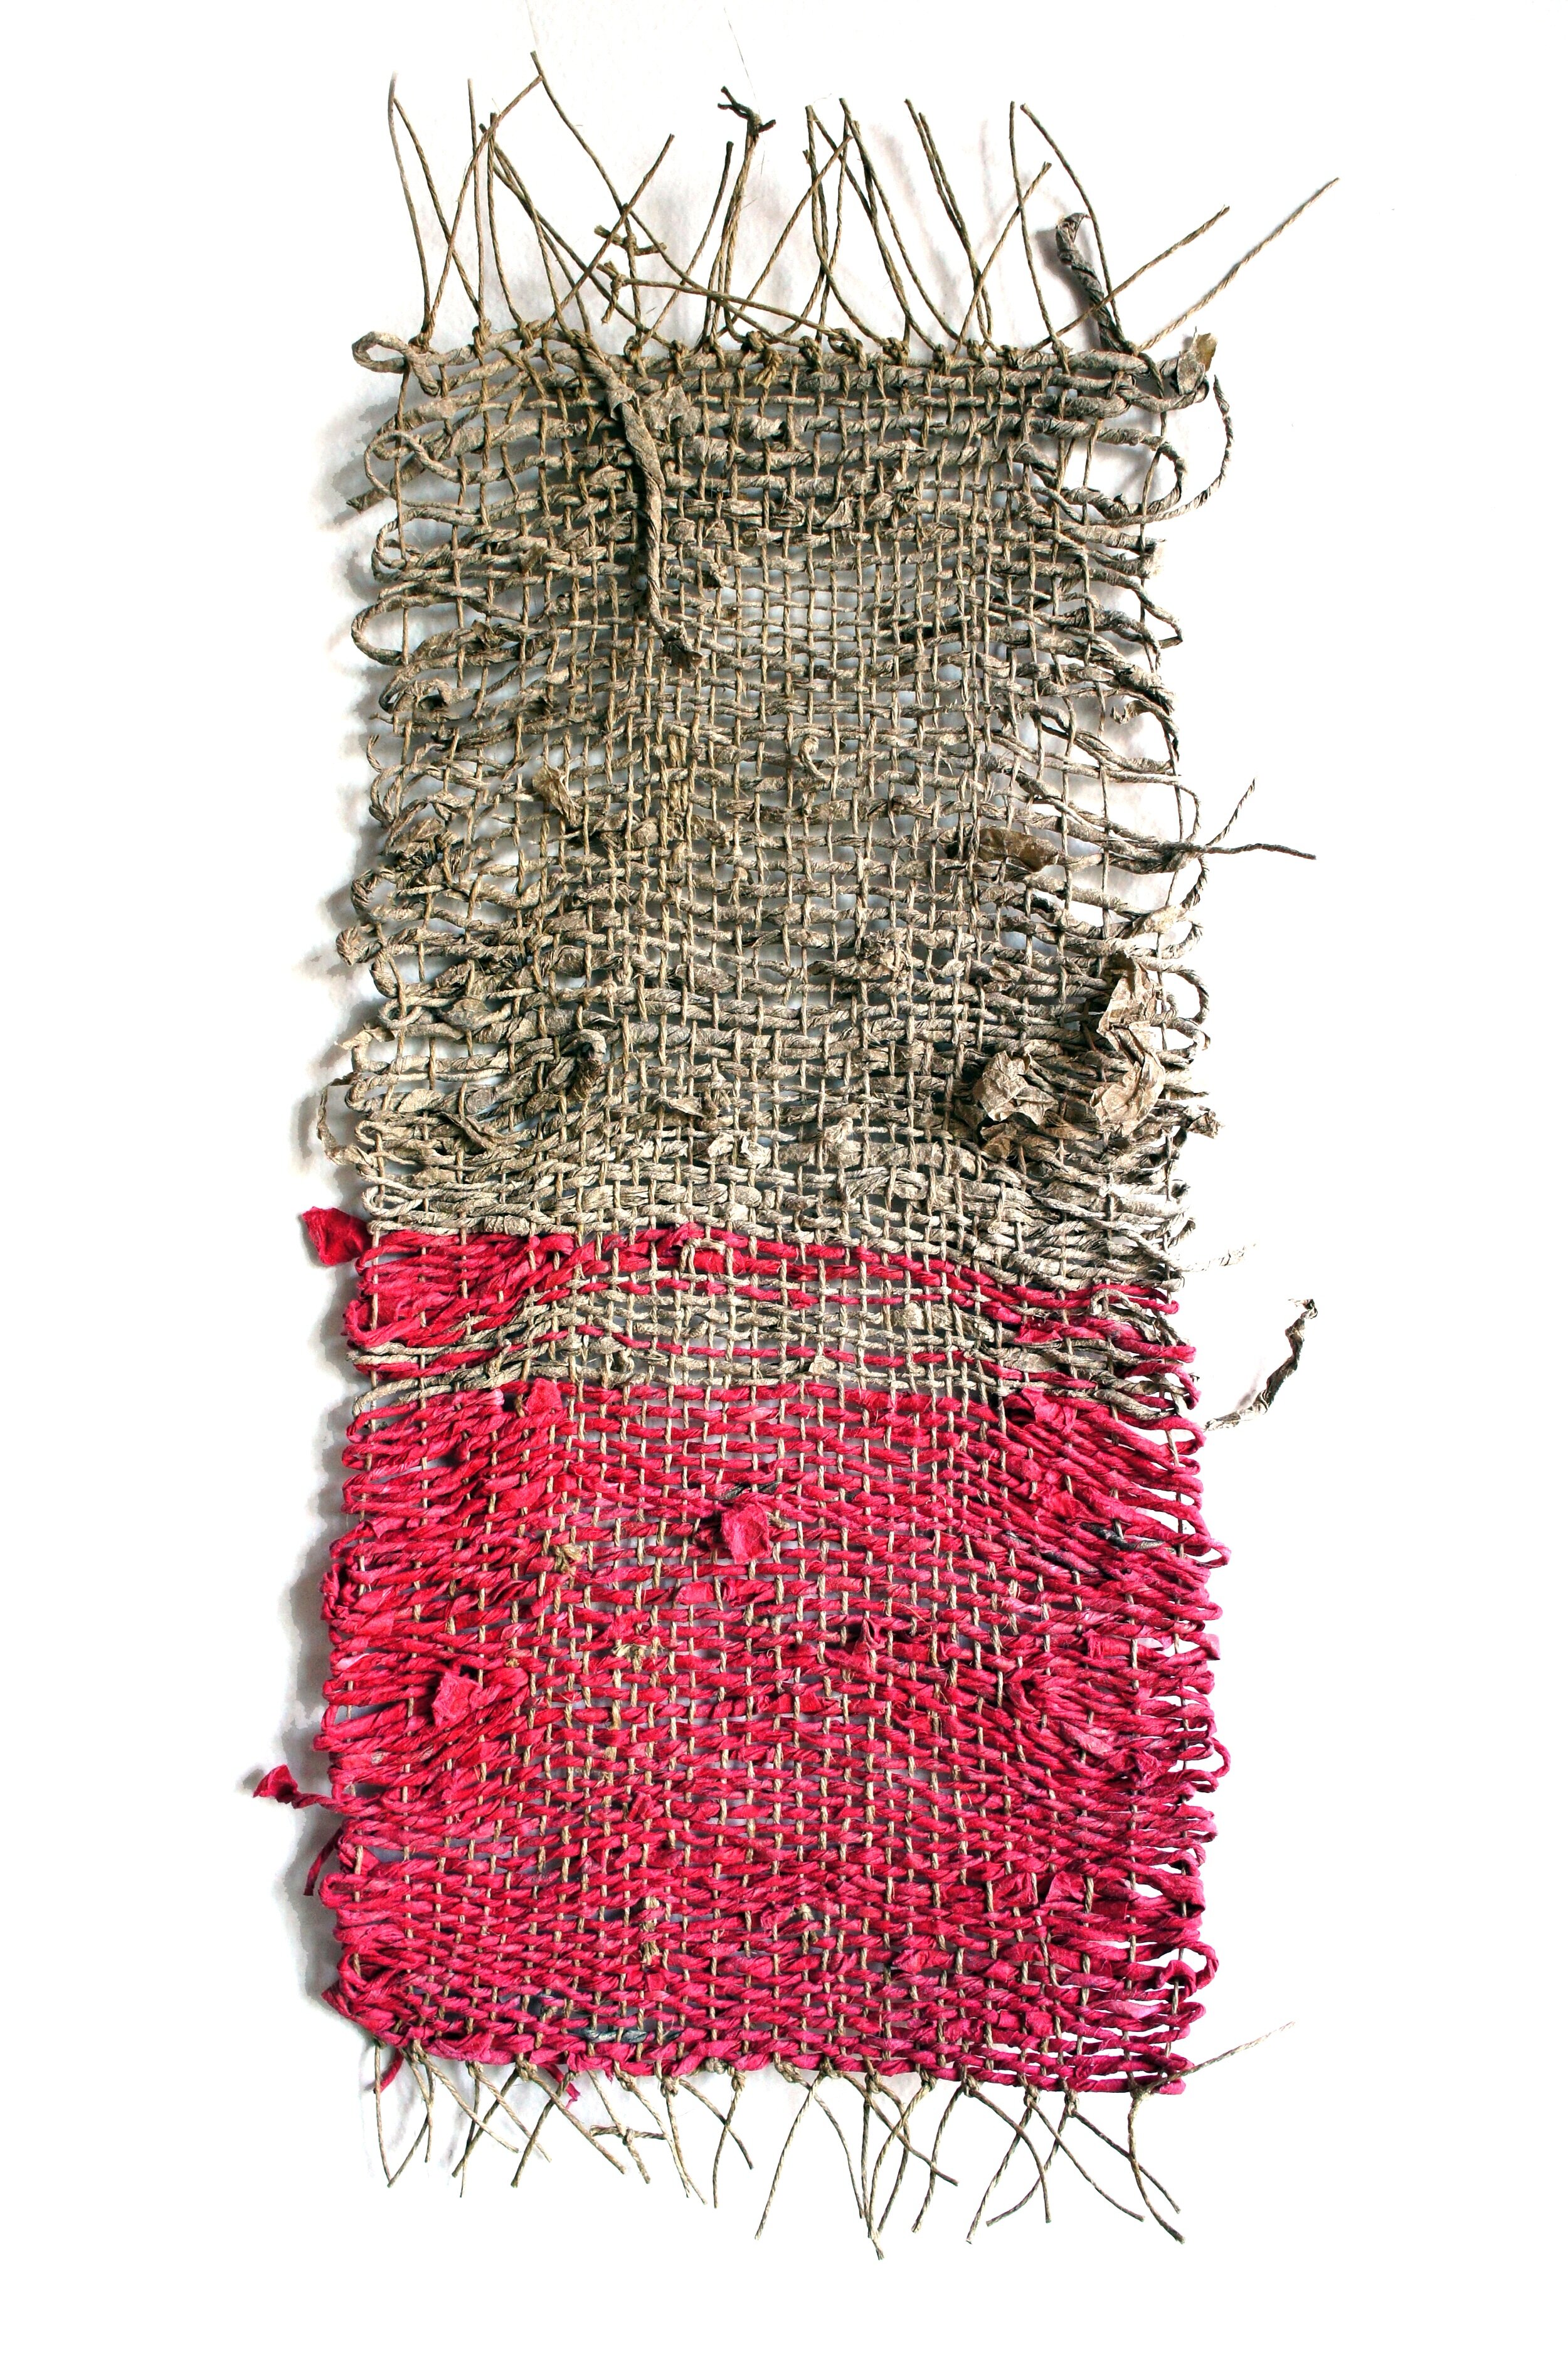   Red Tide, hand spun yarn from handmade paper artworks in flax, mulberry, and local grasses, 12’ x 18”, 2020.  